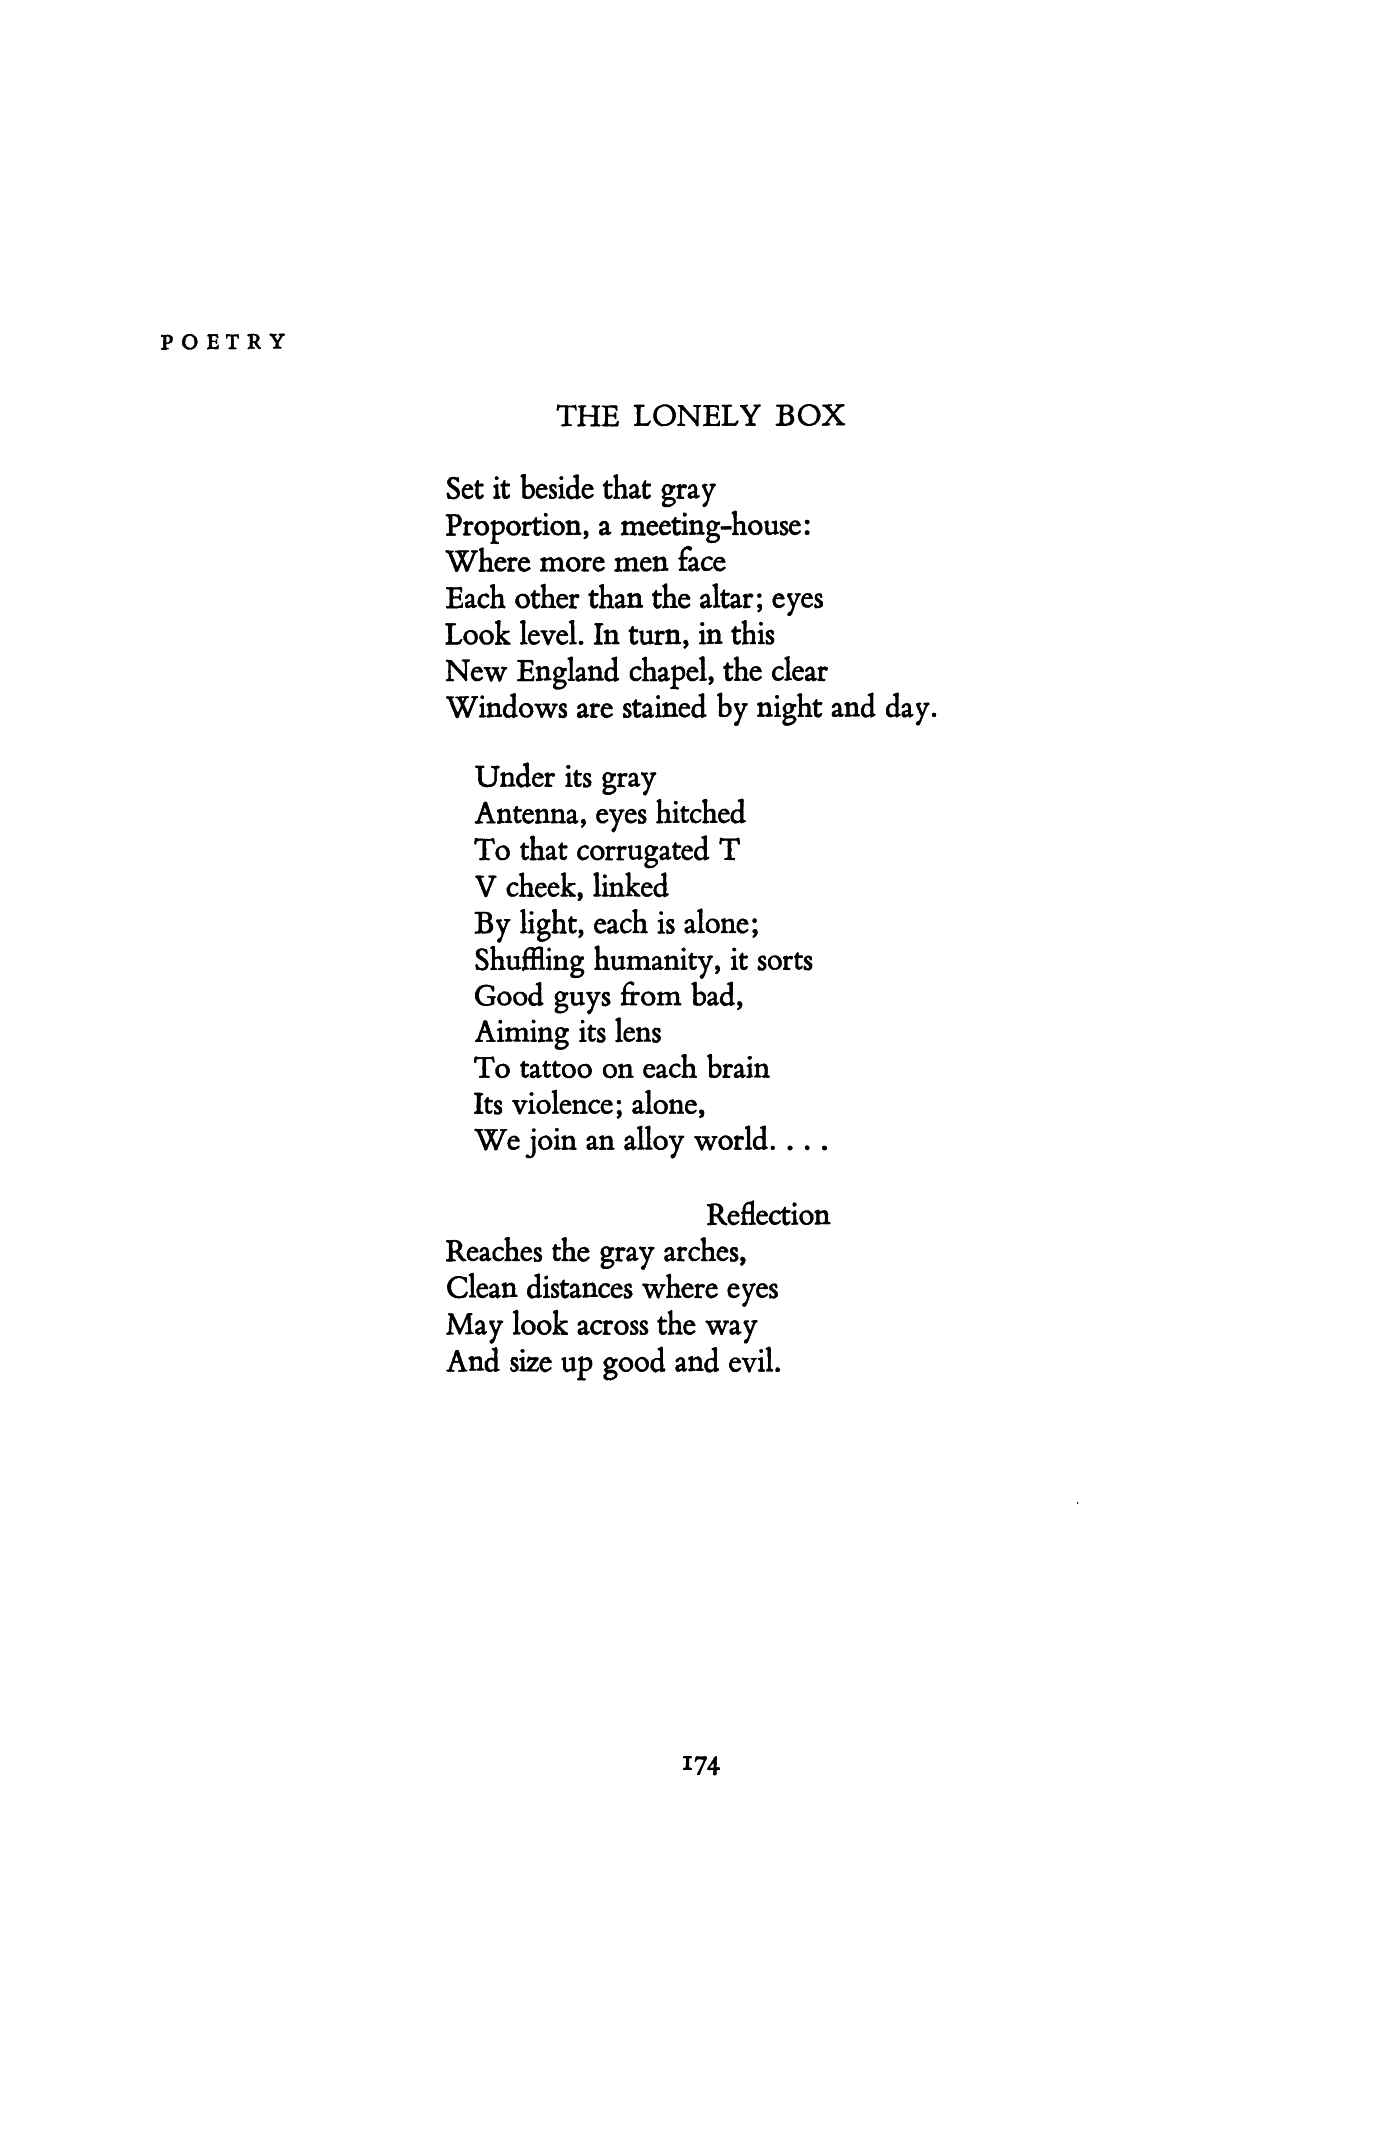 poems about loneliness